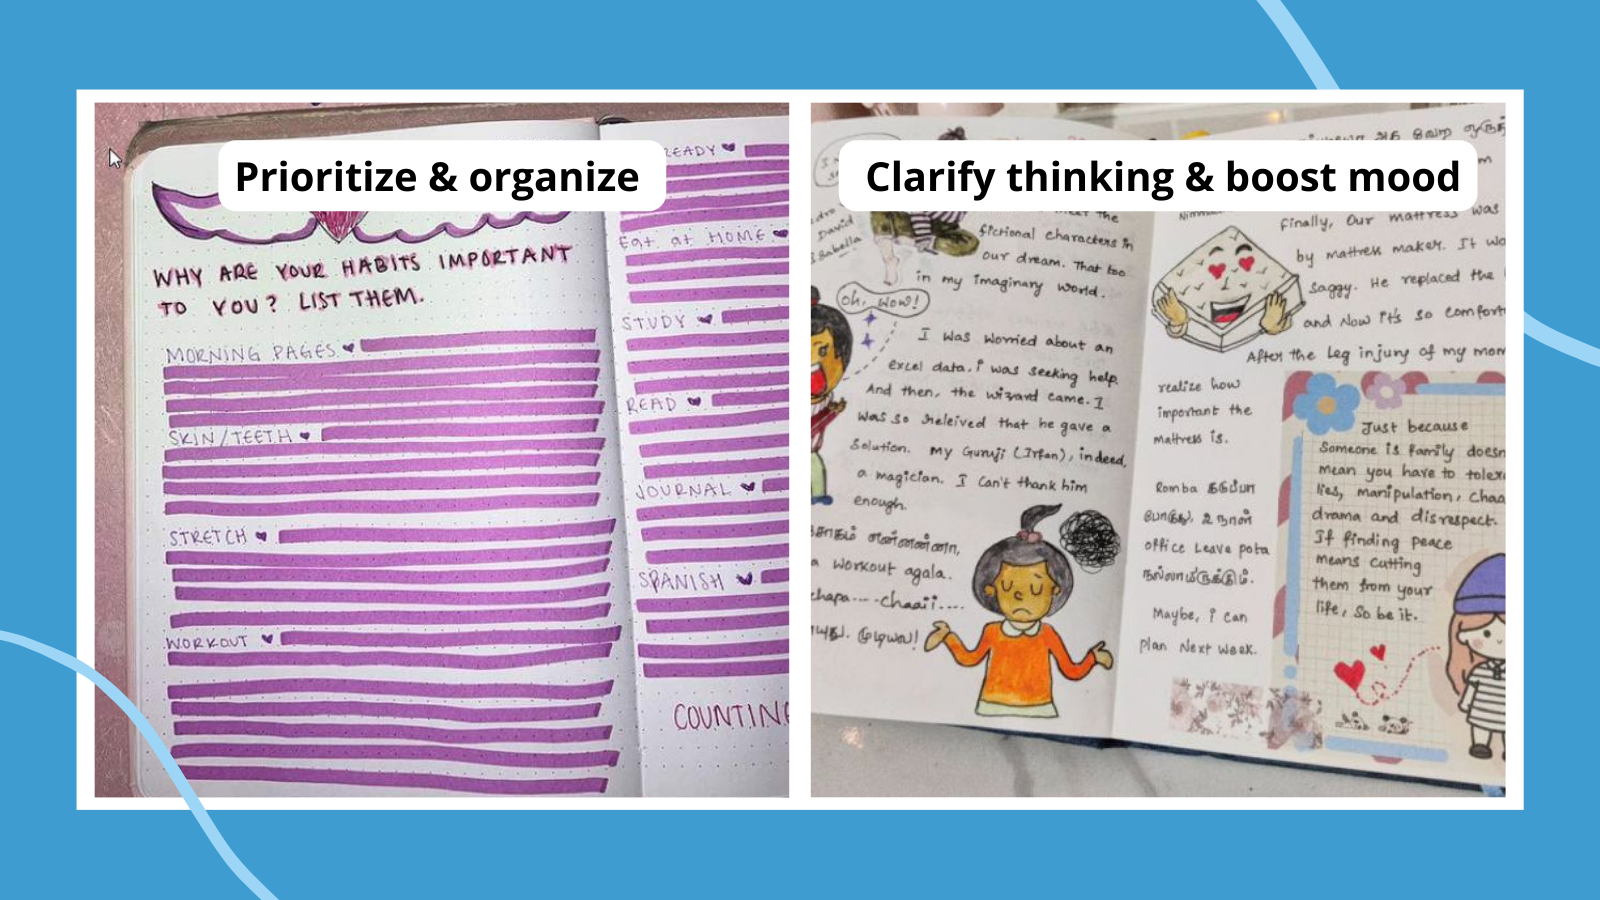 Collage of the benefits of journaling, including prioritize & organize and clarify thinking & boost mood